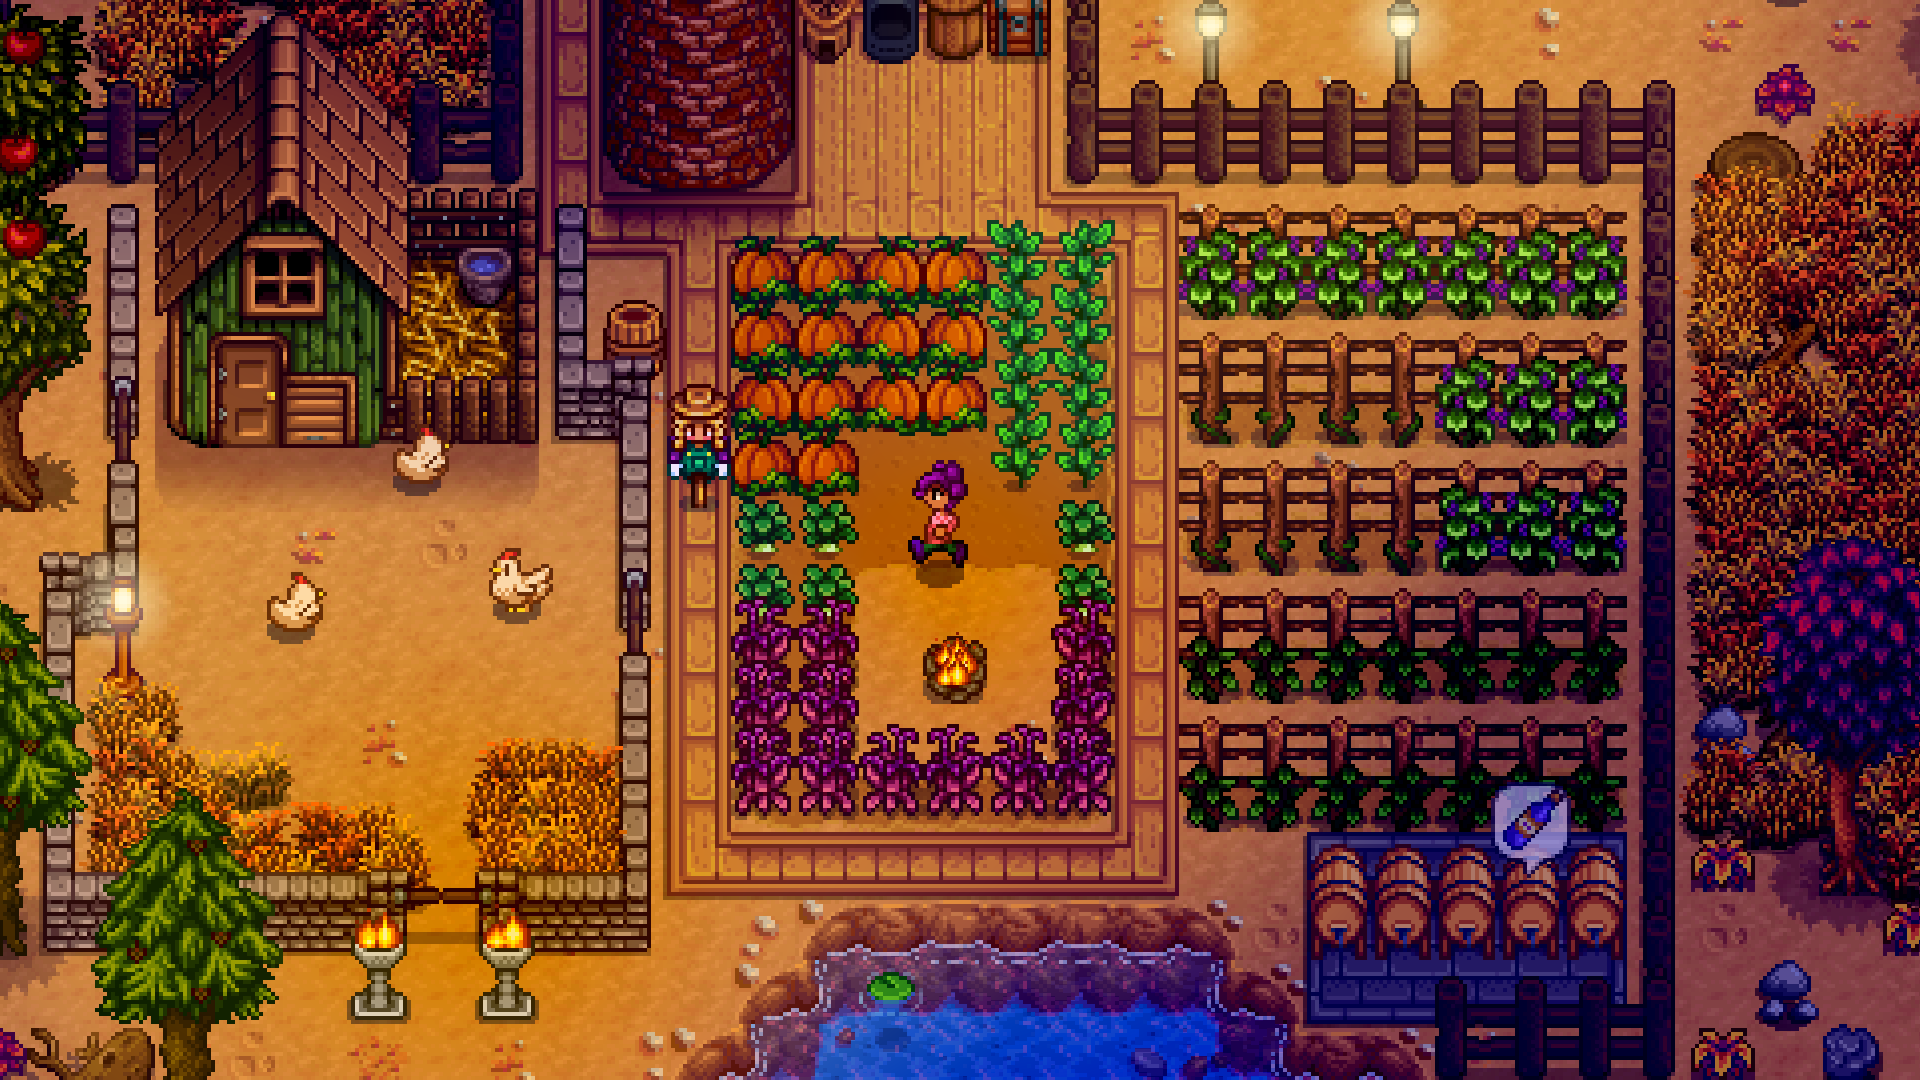 Stardew Valley Android version open for pre-registration